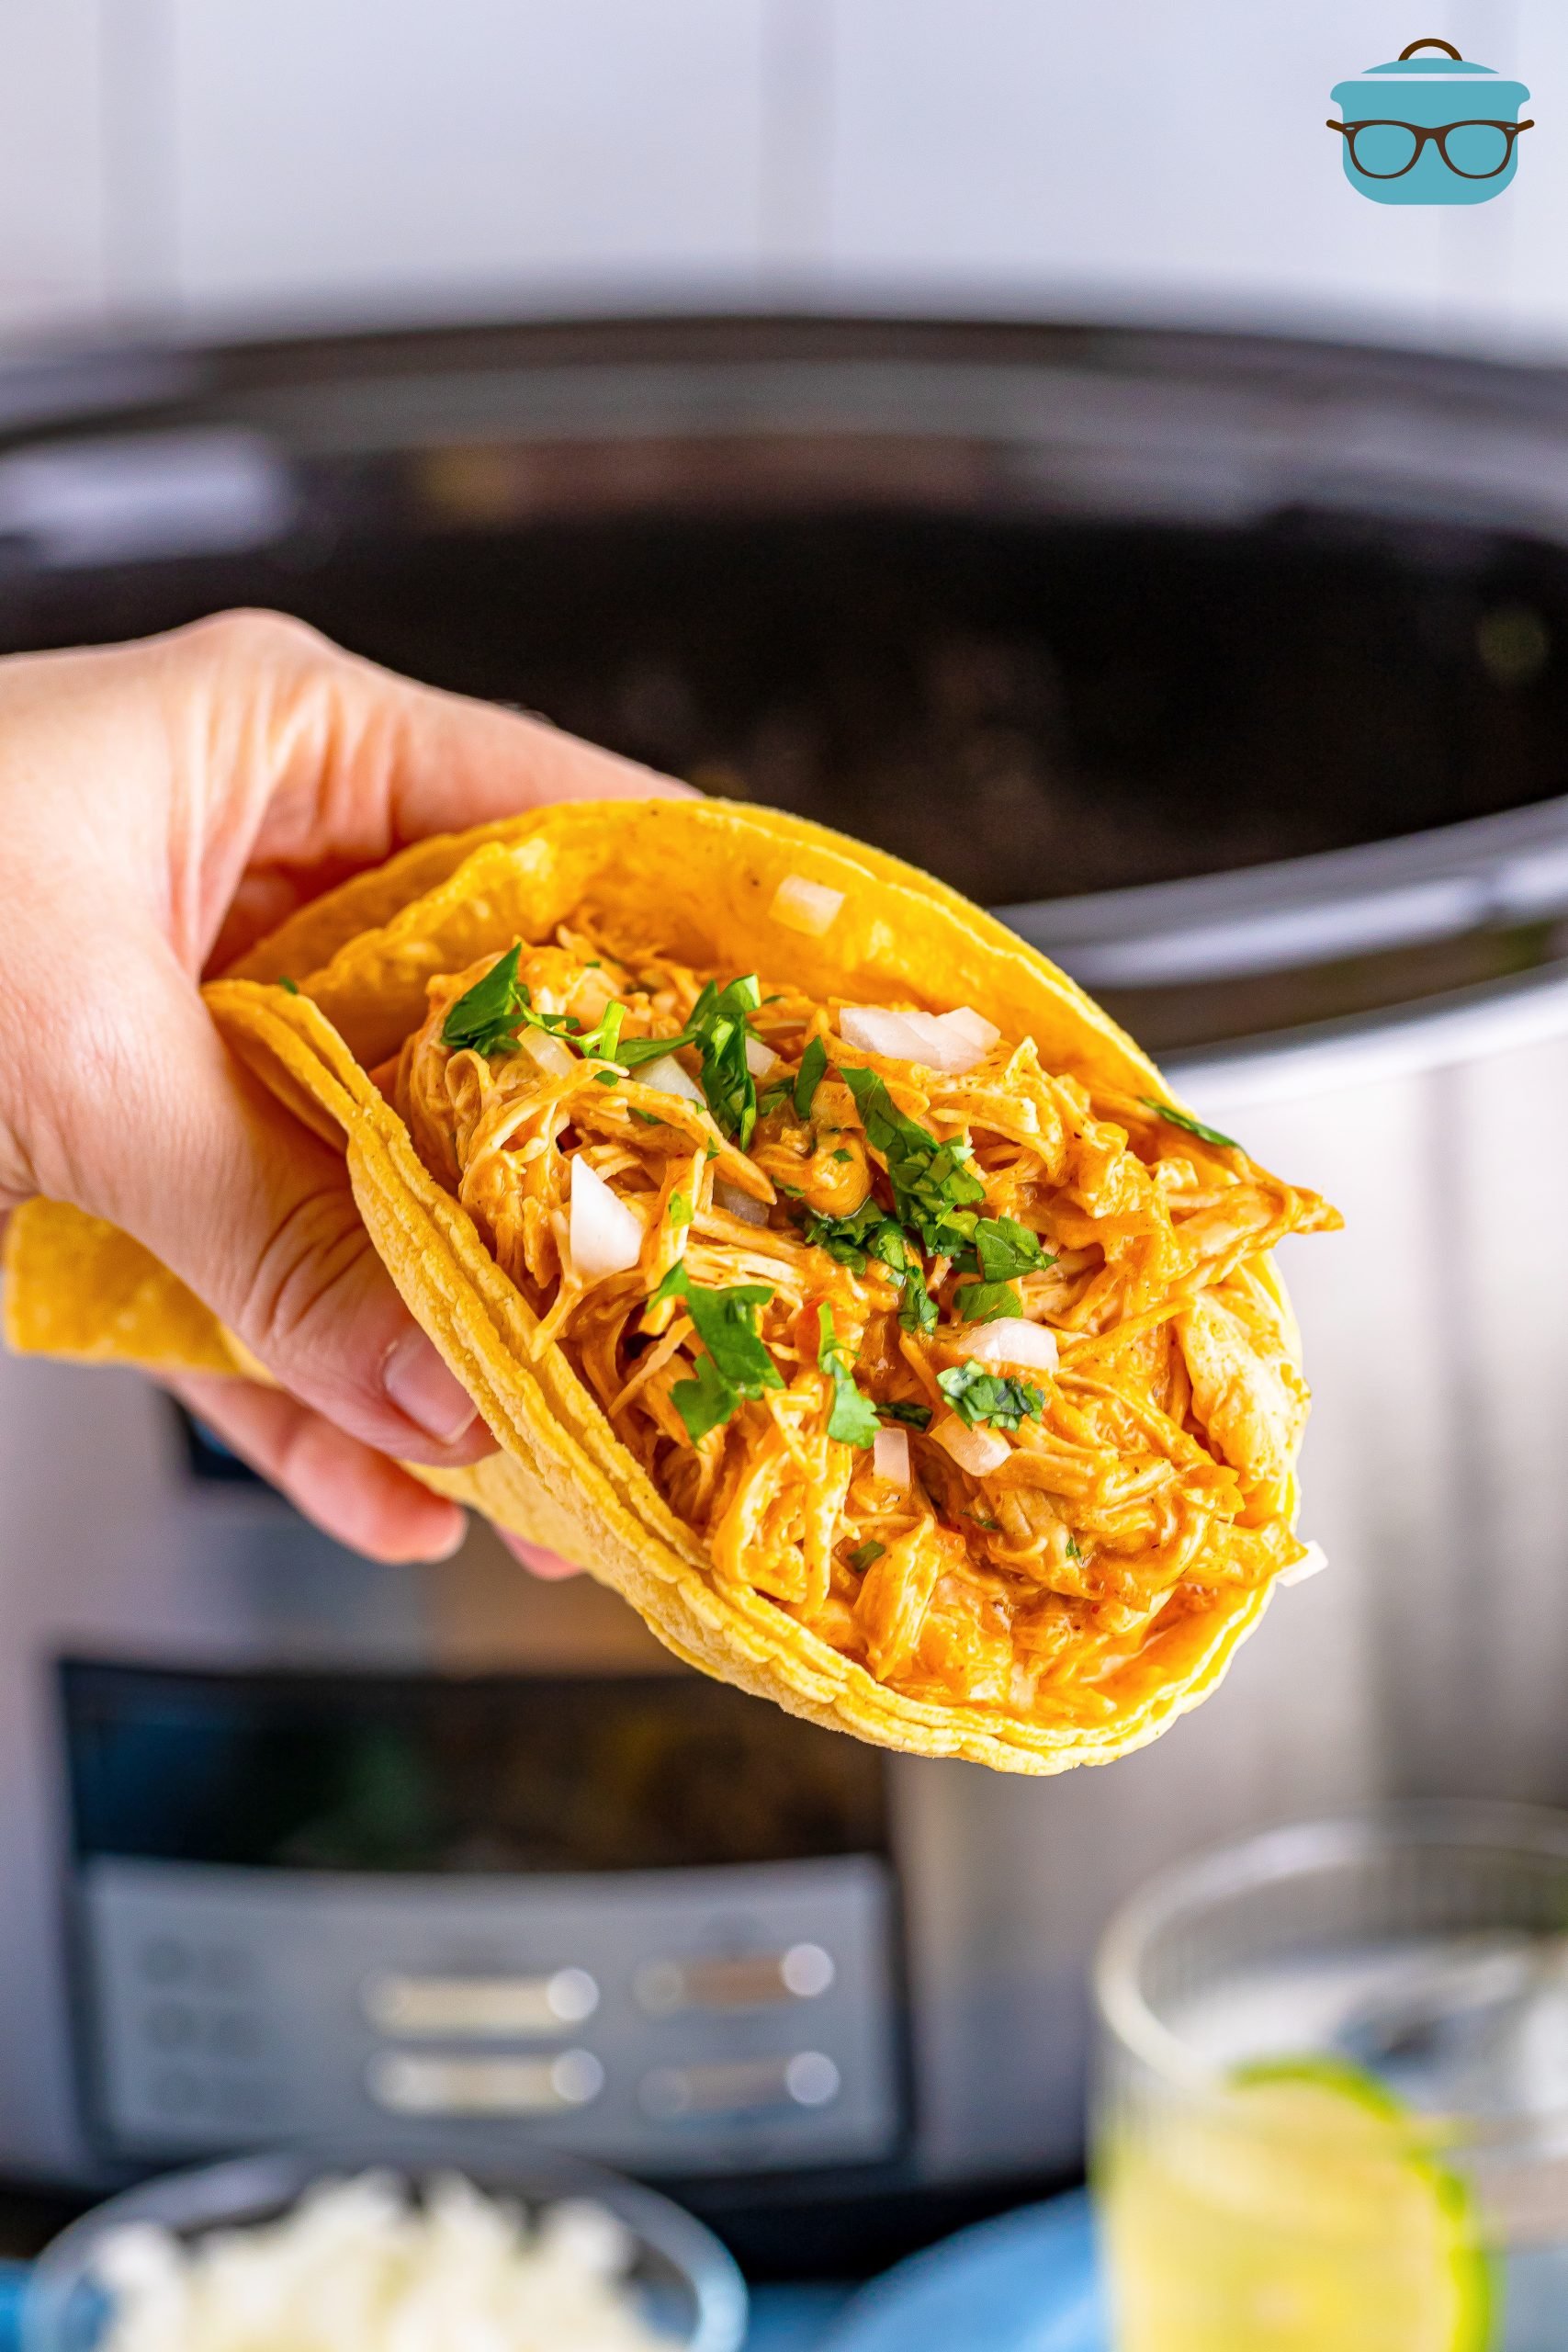 A large Chicken Taco with Shredded Chicken from the slow cooker being held by a hand. 